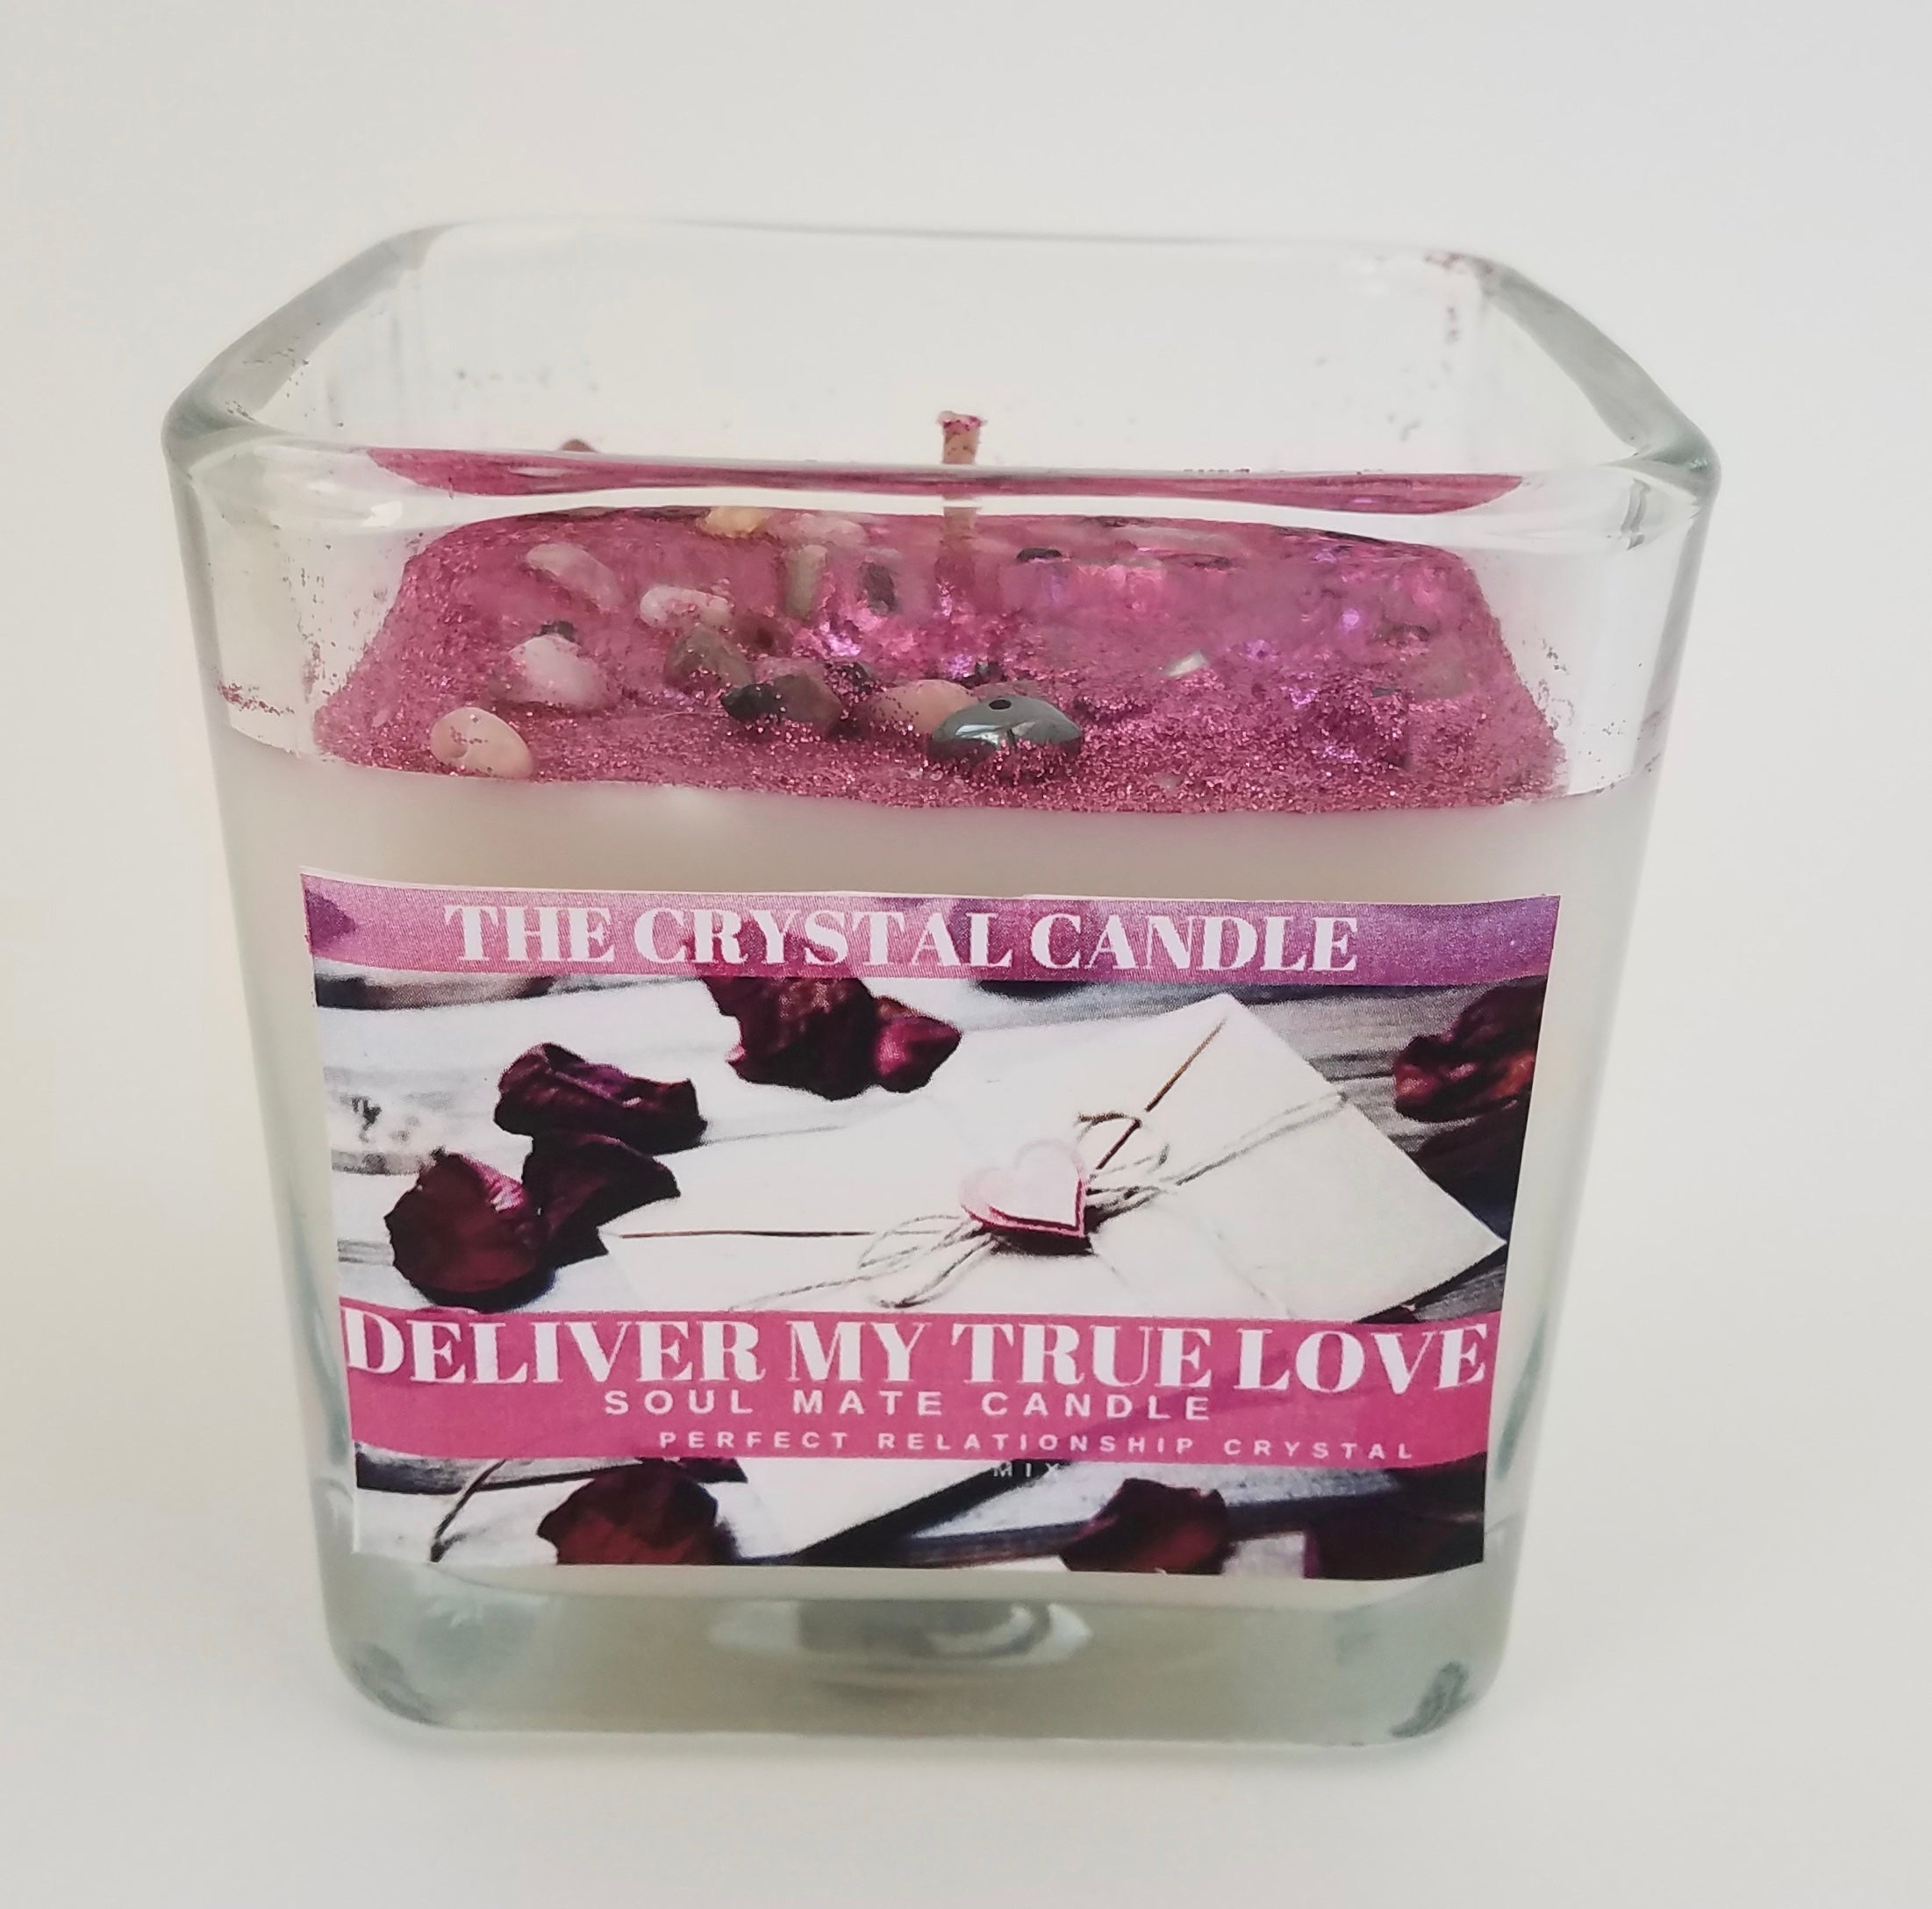 Deliver My True Love - Crystal Candle To Find Your Soulmate